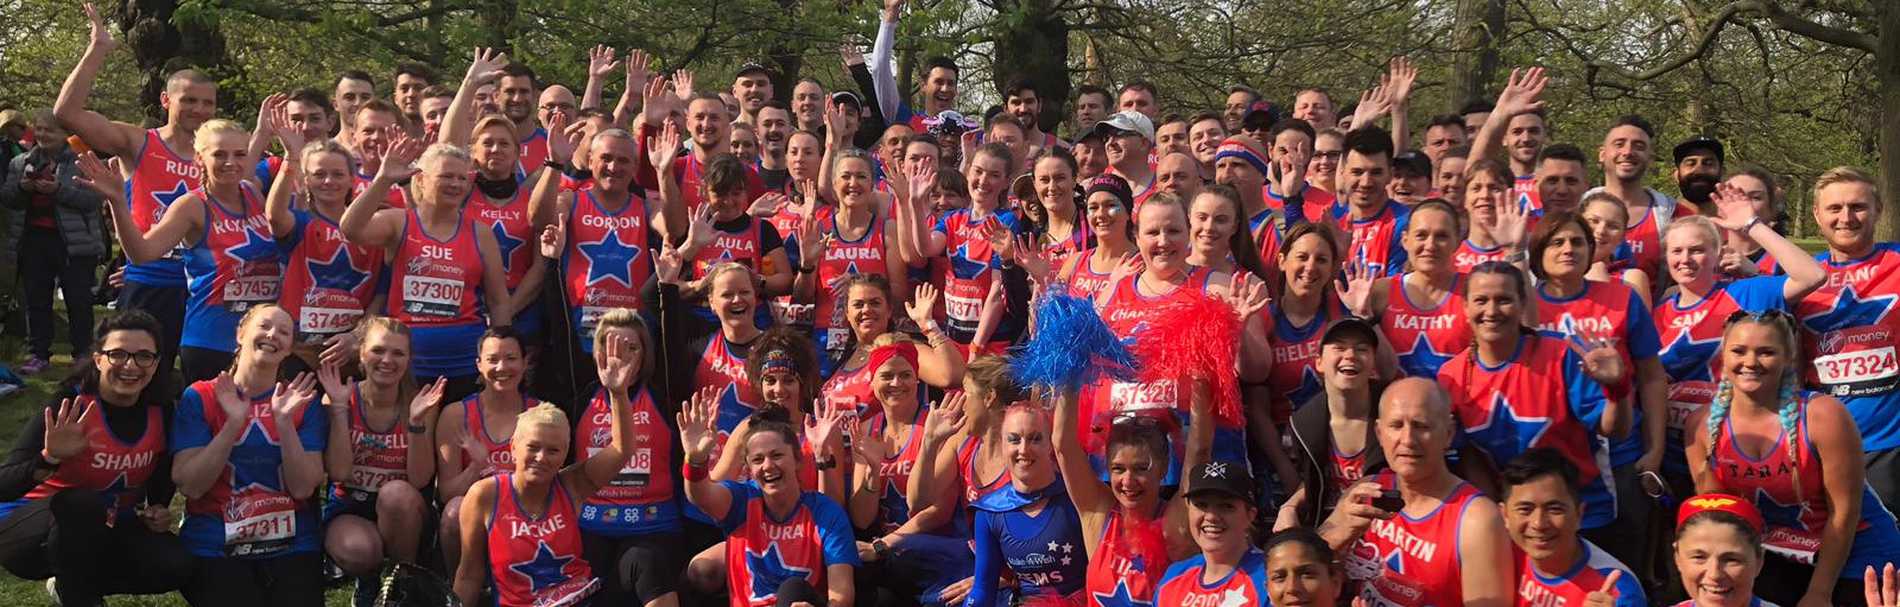 A start line photo of all the Make-A-Wish runners before they started the 2019 London Marathon.